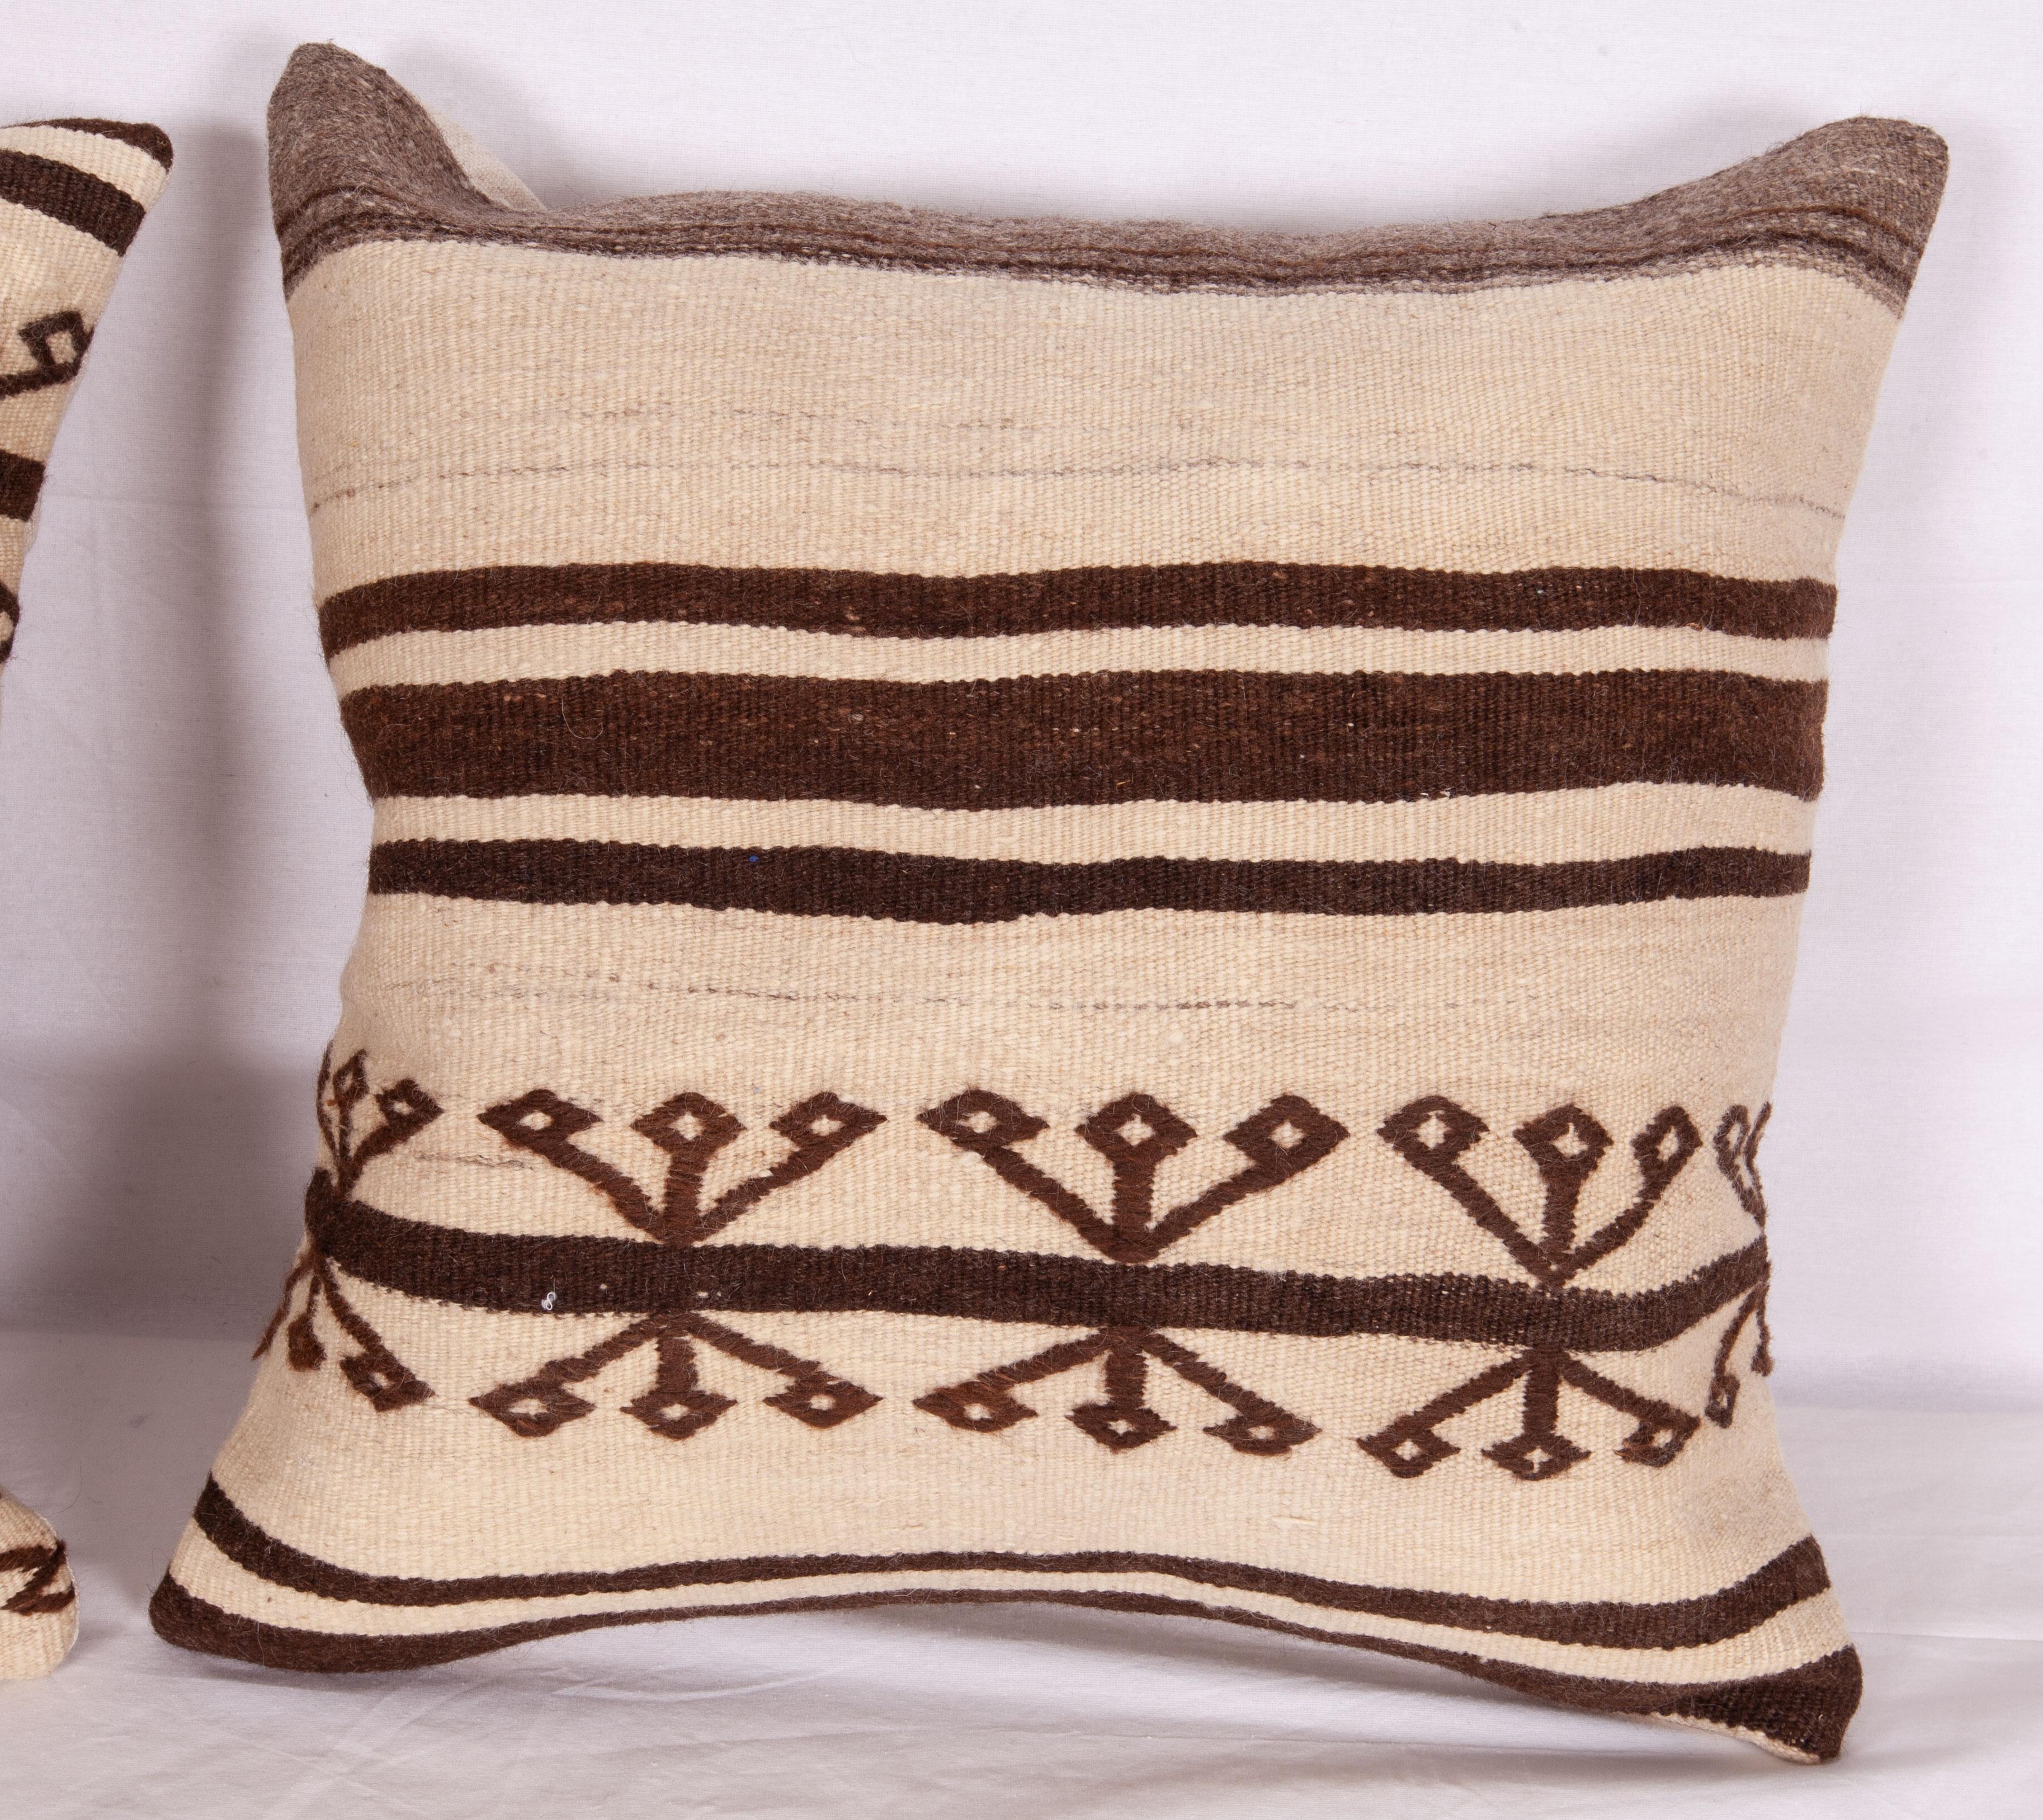 Hand-Woven Neutral Pillow Cases Fashioned from a Mid-20th Century Anatolian Kilim